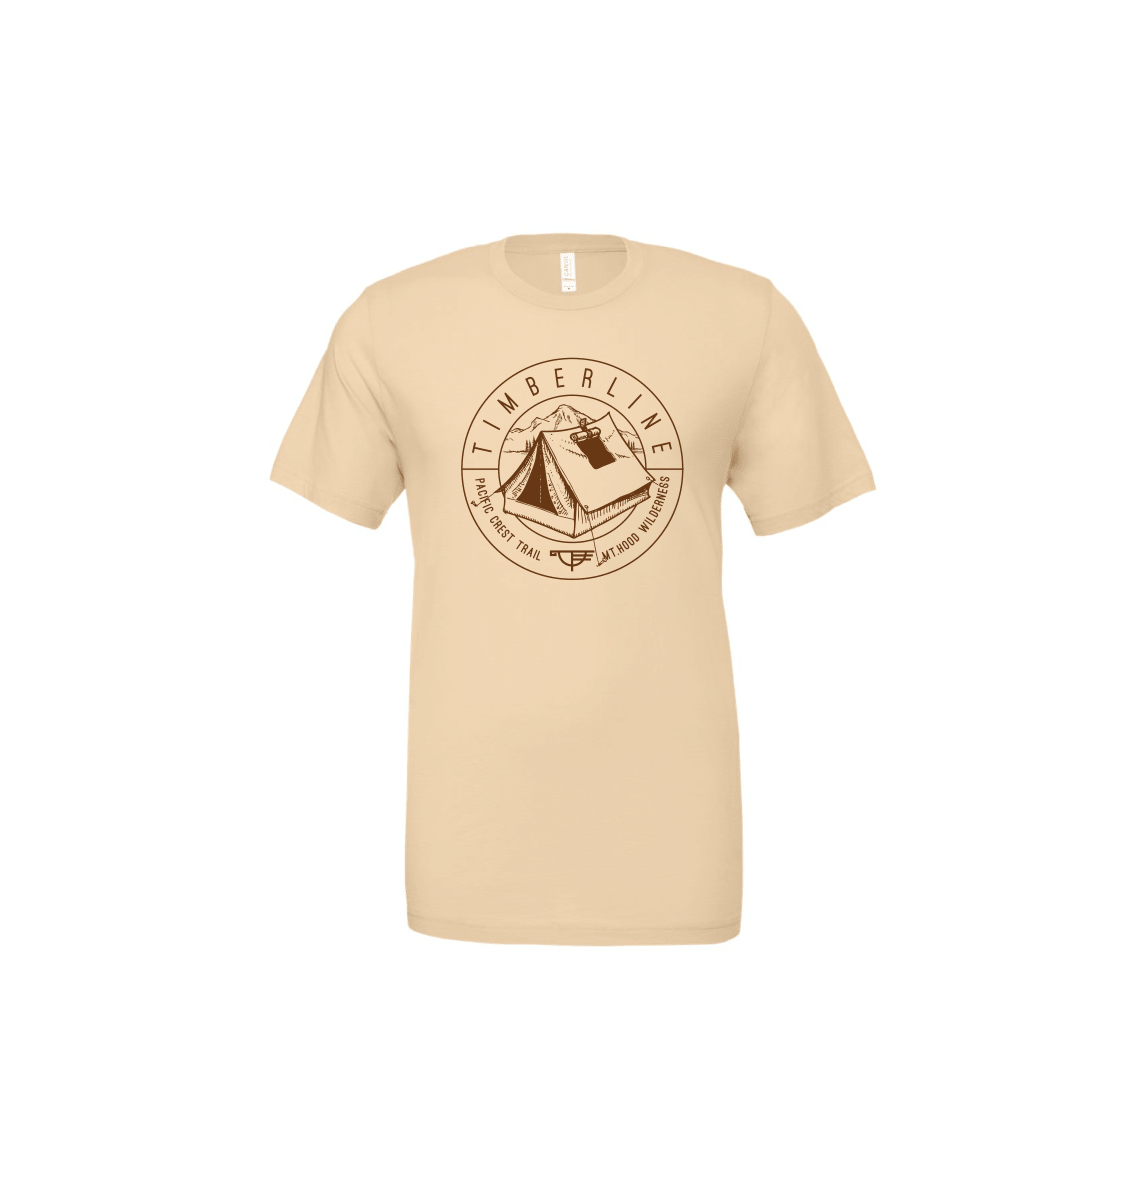 Pacific Crest Trail Adult Short Sleeve T-Shirt - Cream